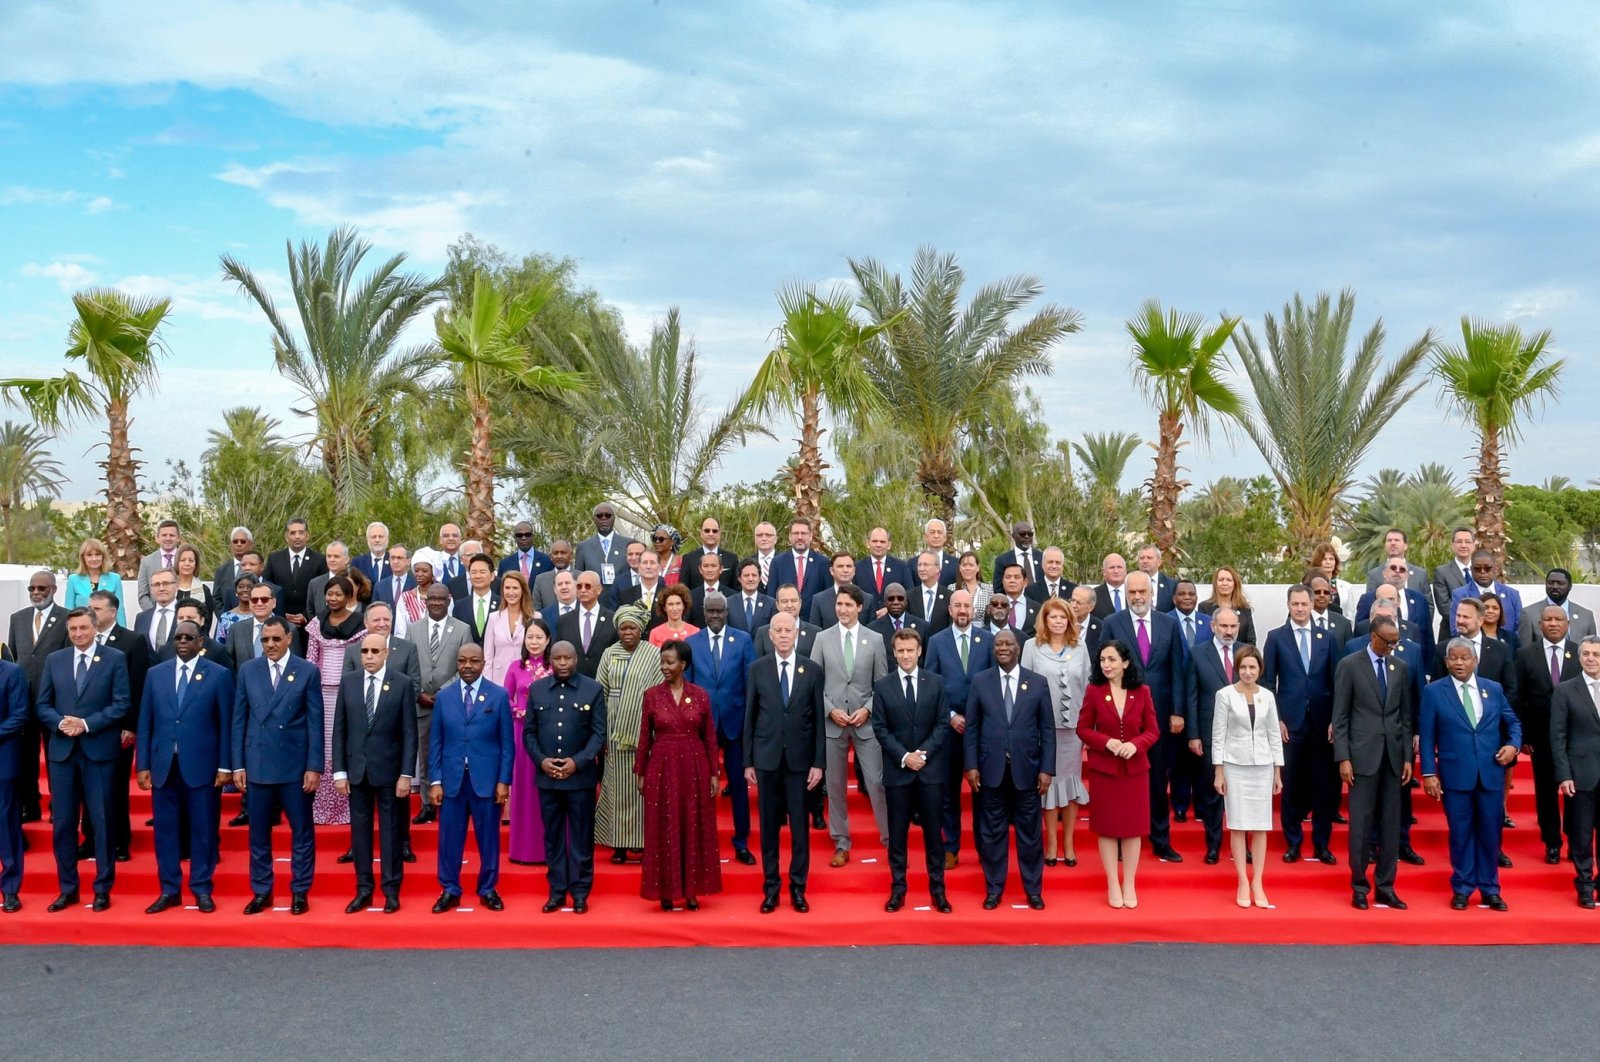 A handout photo made available by the Tunisian presidency press service shows Tunisia&#039;s President Kais Saied (8-R) posing for a group with Secretary General of La Francophonie Louise Mushikiwabo, (9-R) French President Emmanuel Macron (7-R), Ivory Coast&#039;s President Alassane Ouattara (6-R), Canada&#039;s Prime Minister Justin Trudeau (C), and other officials and leaders of French-speaking countries, at the 18th Francophonie Summit in Djerba, Tunisia, Nov. 19, 2022. (EPA Photo)